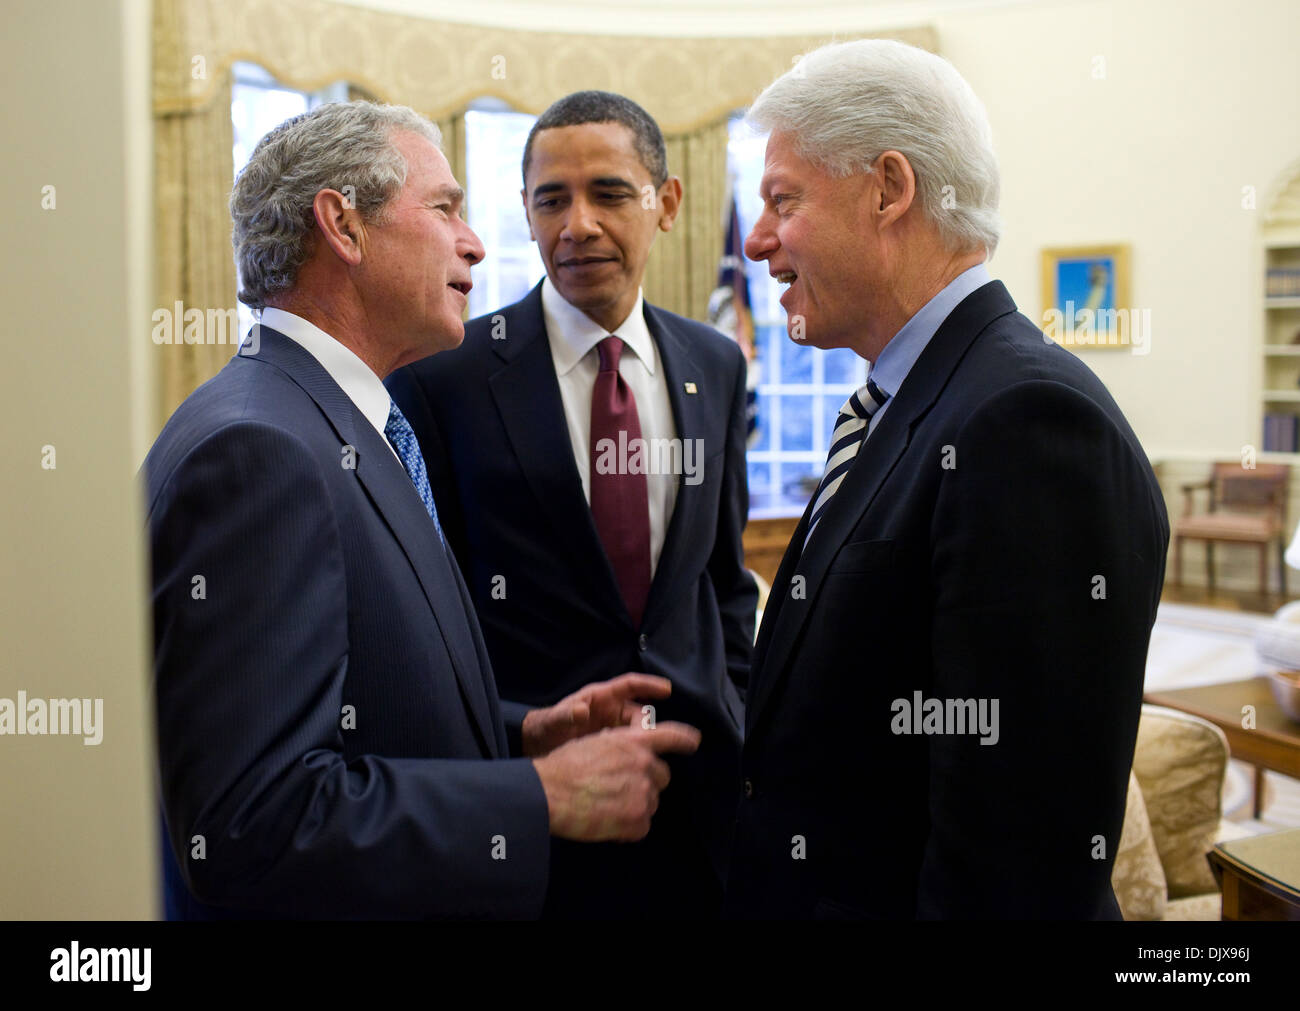 US President Barack Obama looks on as former President George W. Bush jokes with former President Bill Clinton in the Oval Office of the White House January 16, 2010 in Washington, DC. President Obama asked the two former Presidents to help with the earthquake in Haiti. Stock Photo